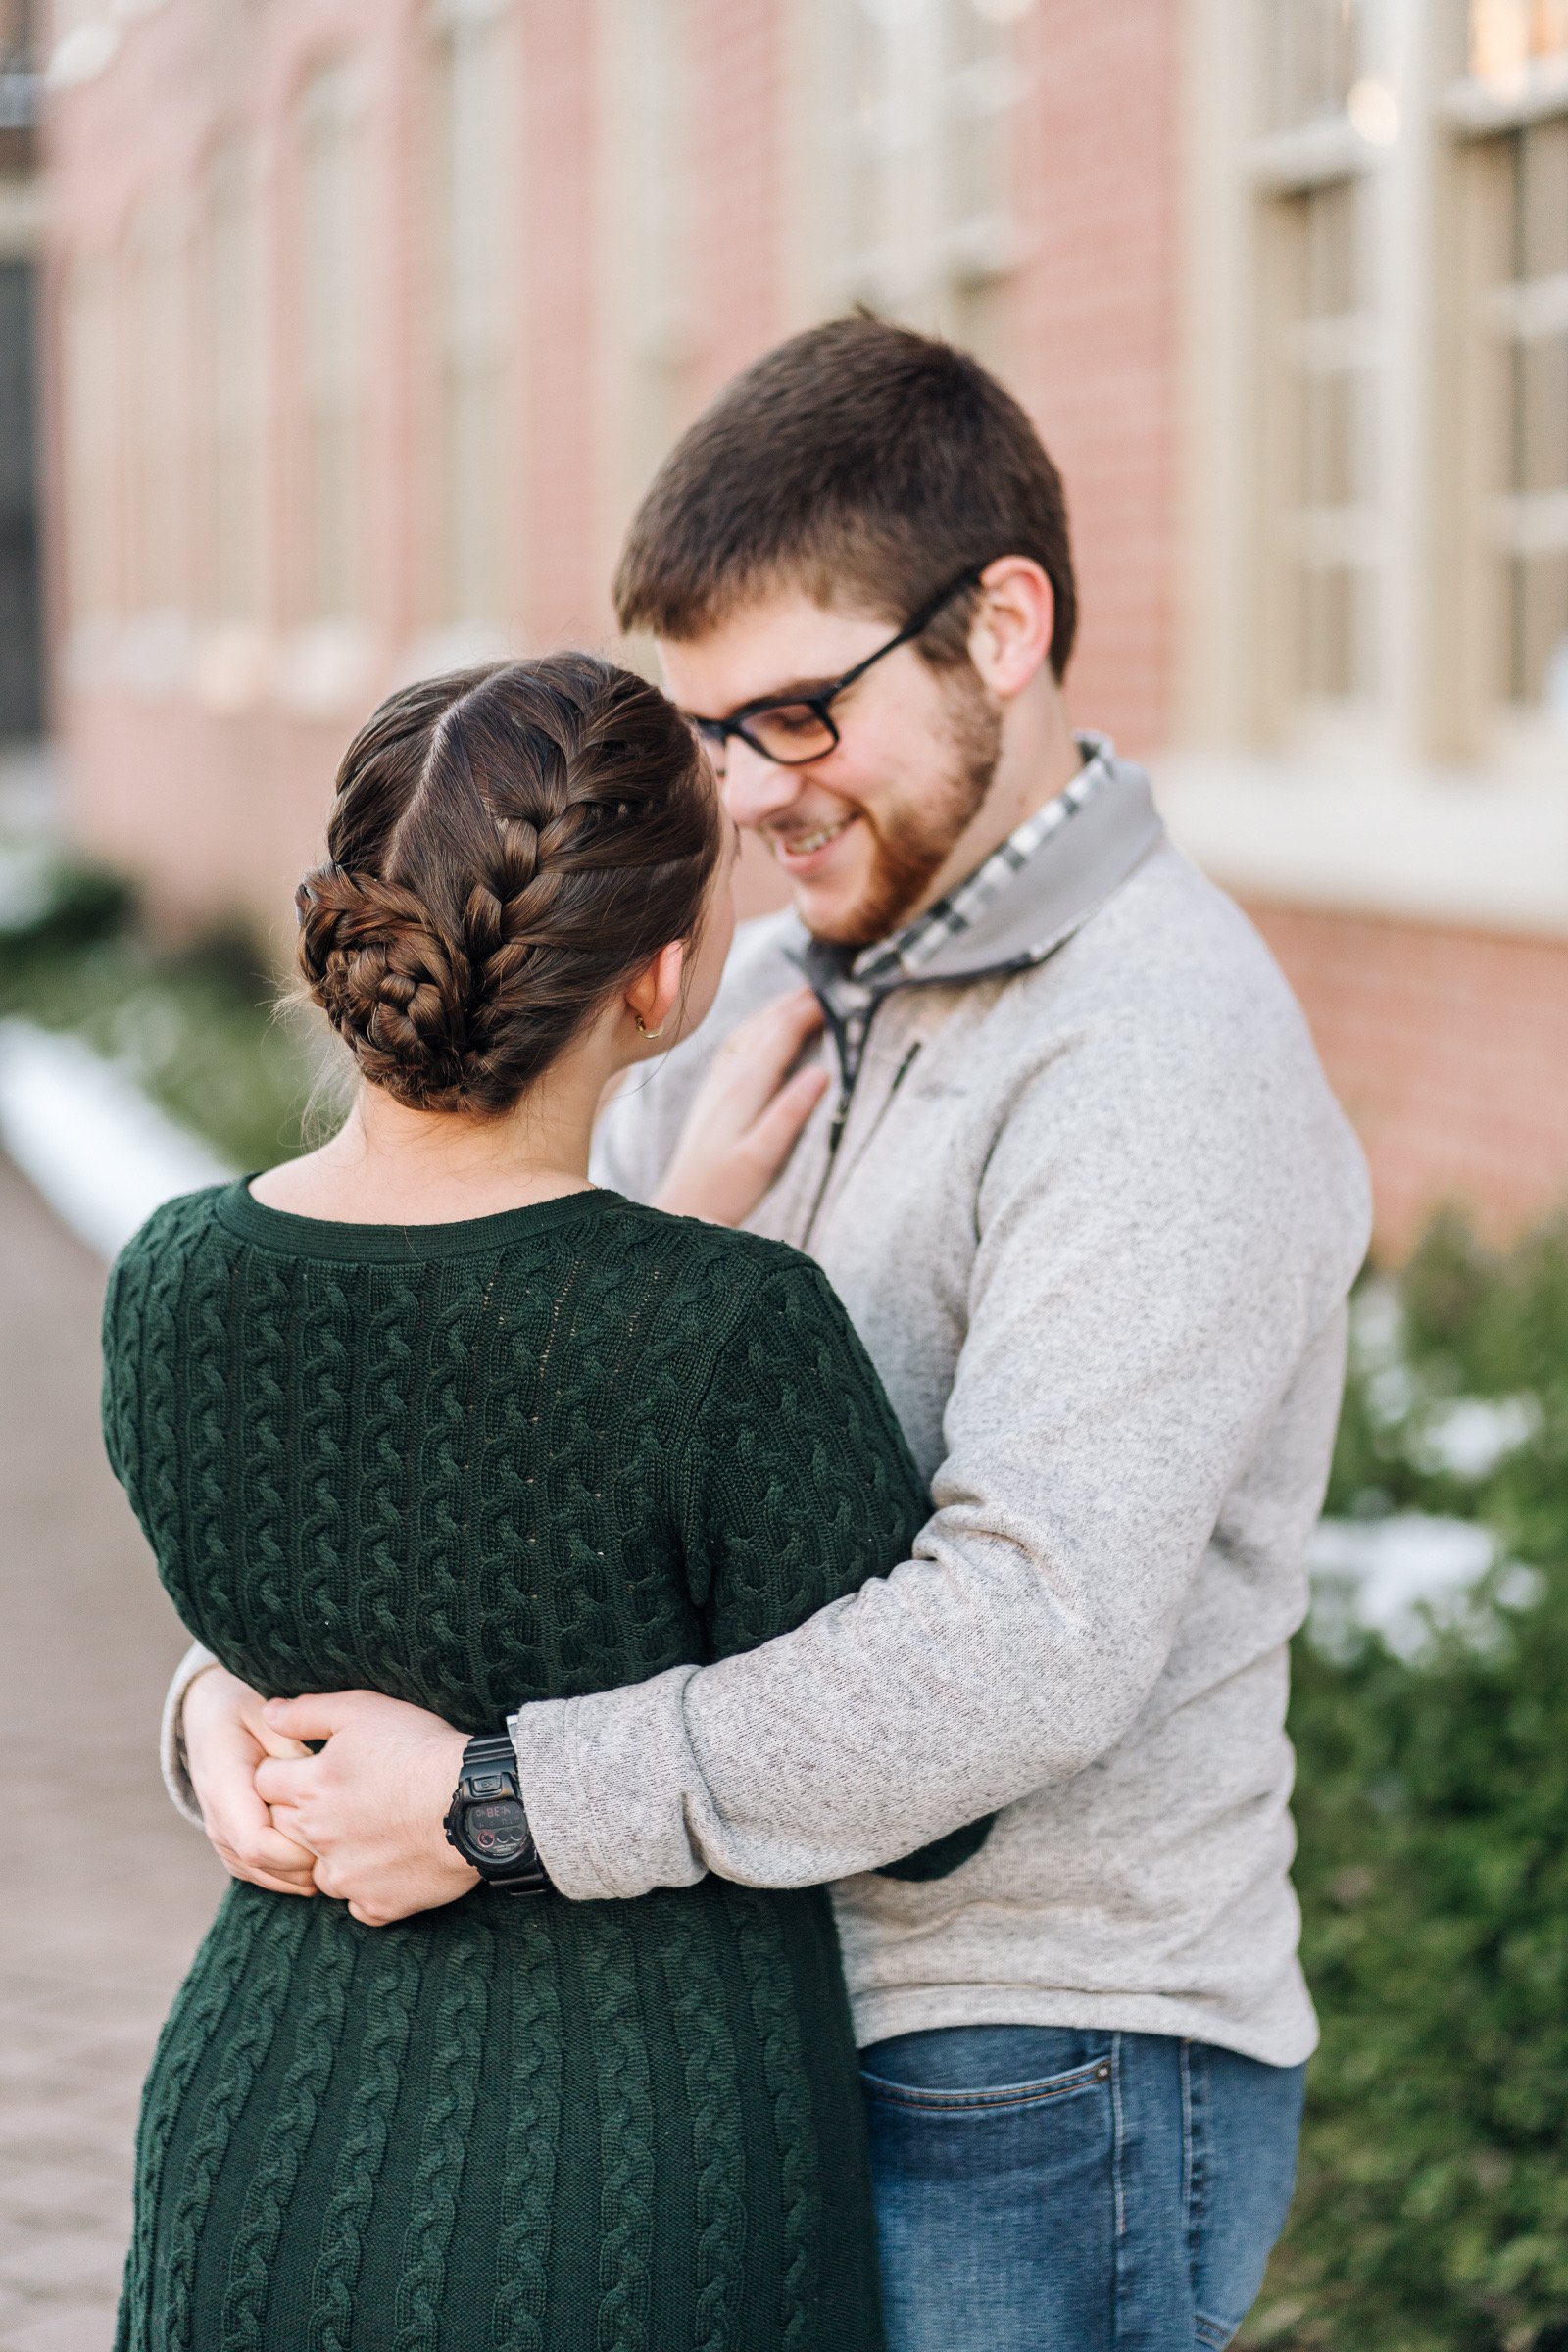 jameson-anna-engagement-session-downtown-danville-river-district-virginia-by-jonathan-hannah-photography-11.jpg